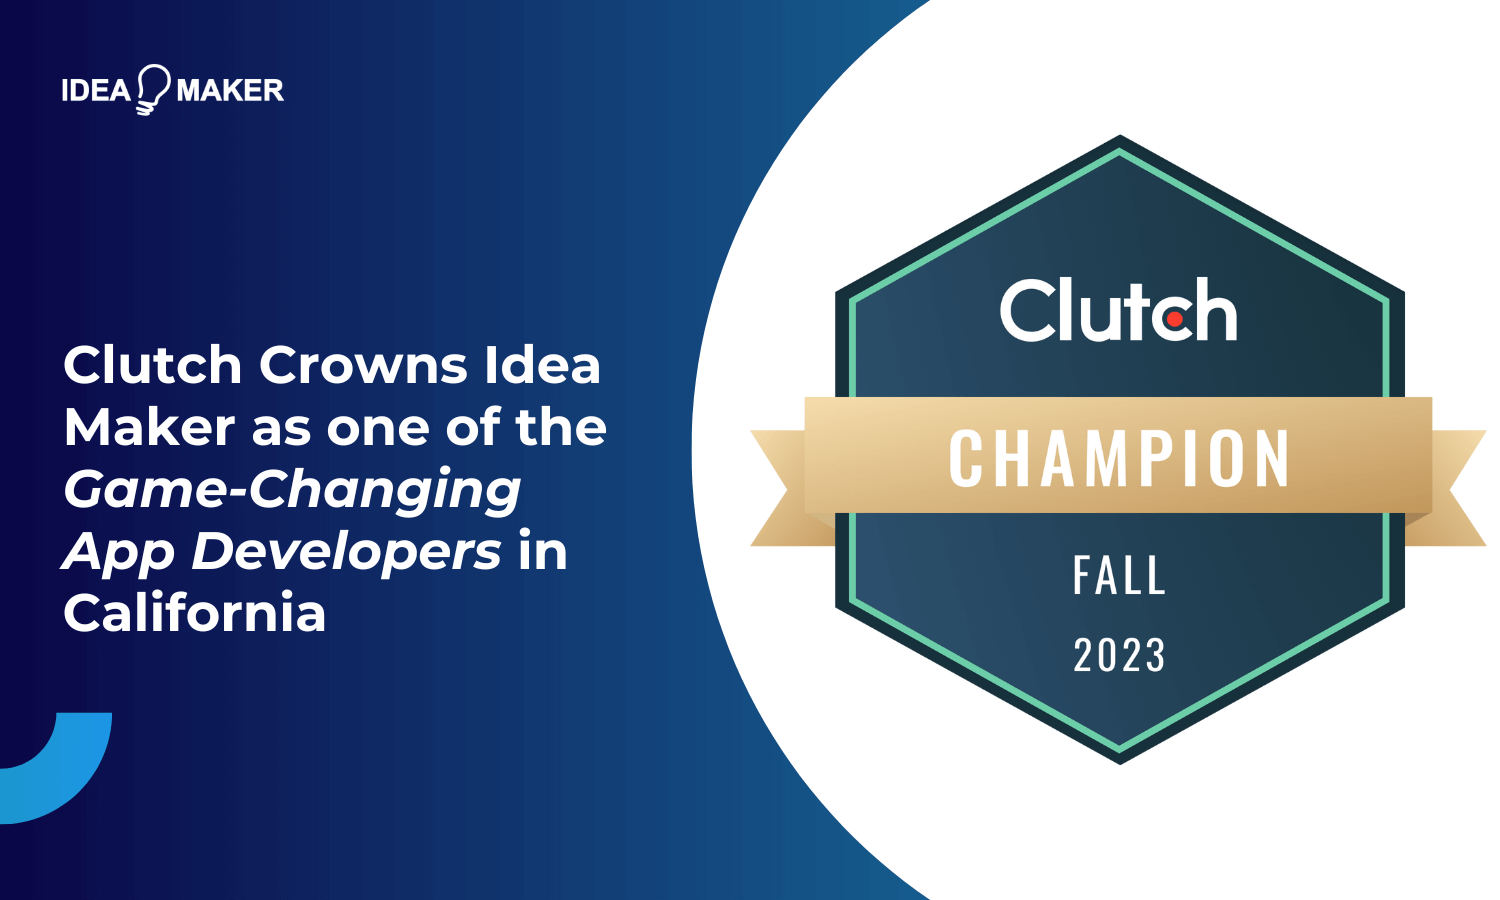 Clutch Crowns Idea Maker as one of the Game-Changing App Developers in California (1)